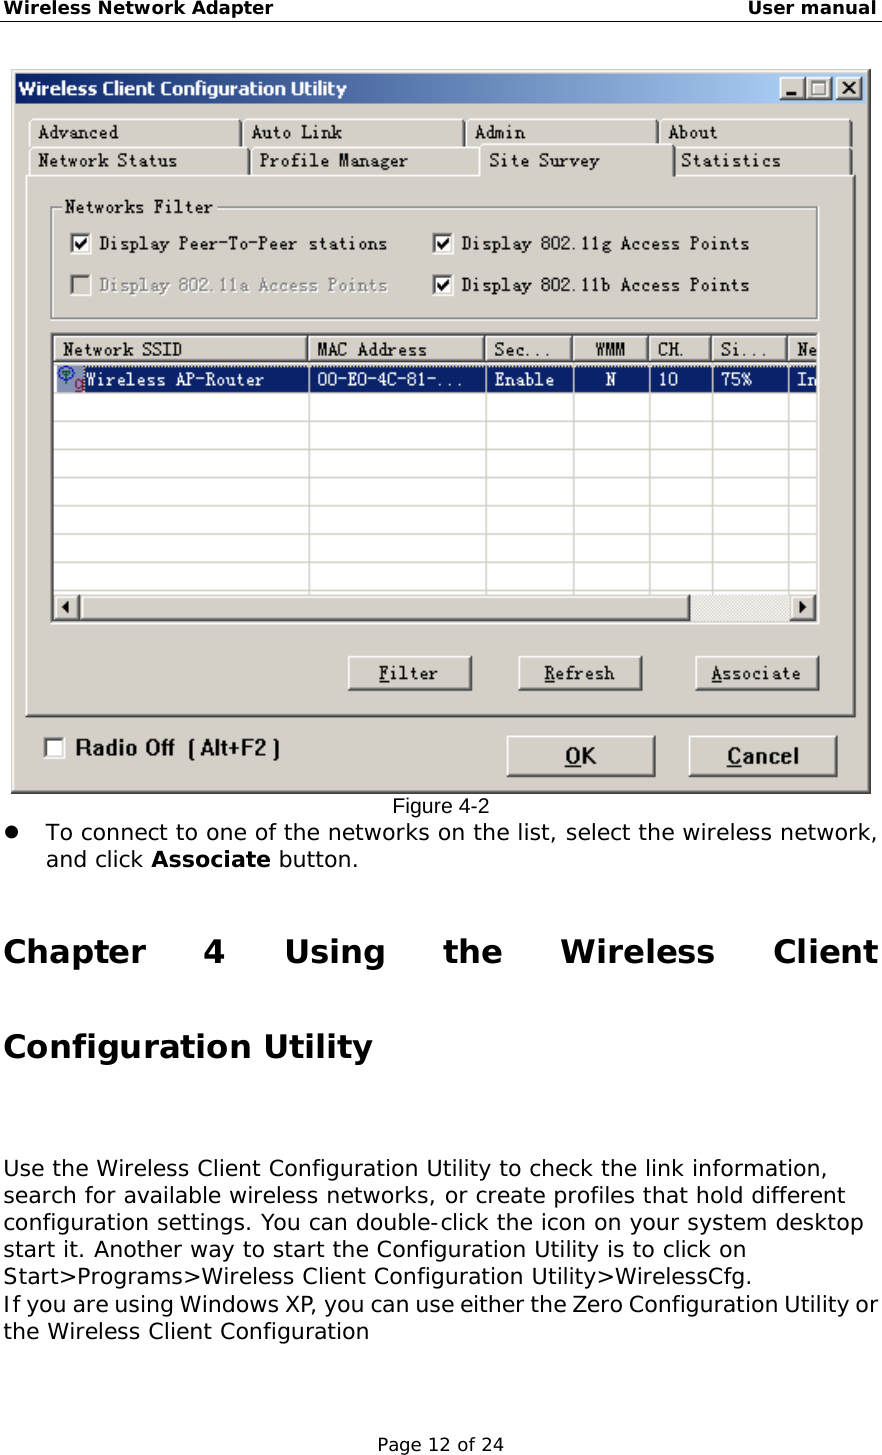 Wireless Network Adapter                                                    User manual Page 12 of 24  Figure 4-2   To connect to one of the networks on the list, select the wireless network, and click Associate button.   Chapter 4 Using the Wireless Client Configuration Utility Use the Wireless Client Configuration Utility to check the link information, search for available wireless networks, or create profiles that hold different configuration settings. You can double-click the icon on your system desktop start it. Another way to start the Configuration Utility is to click on Start&gt;Programs&gt;Wireless Client Configuration Utility&gt;WirelessCfg. If you are using Windows XP, you can use either the Zero Configuration Utility or the Wireless Client Configuration 